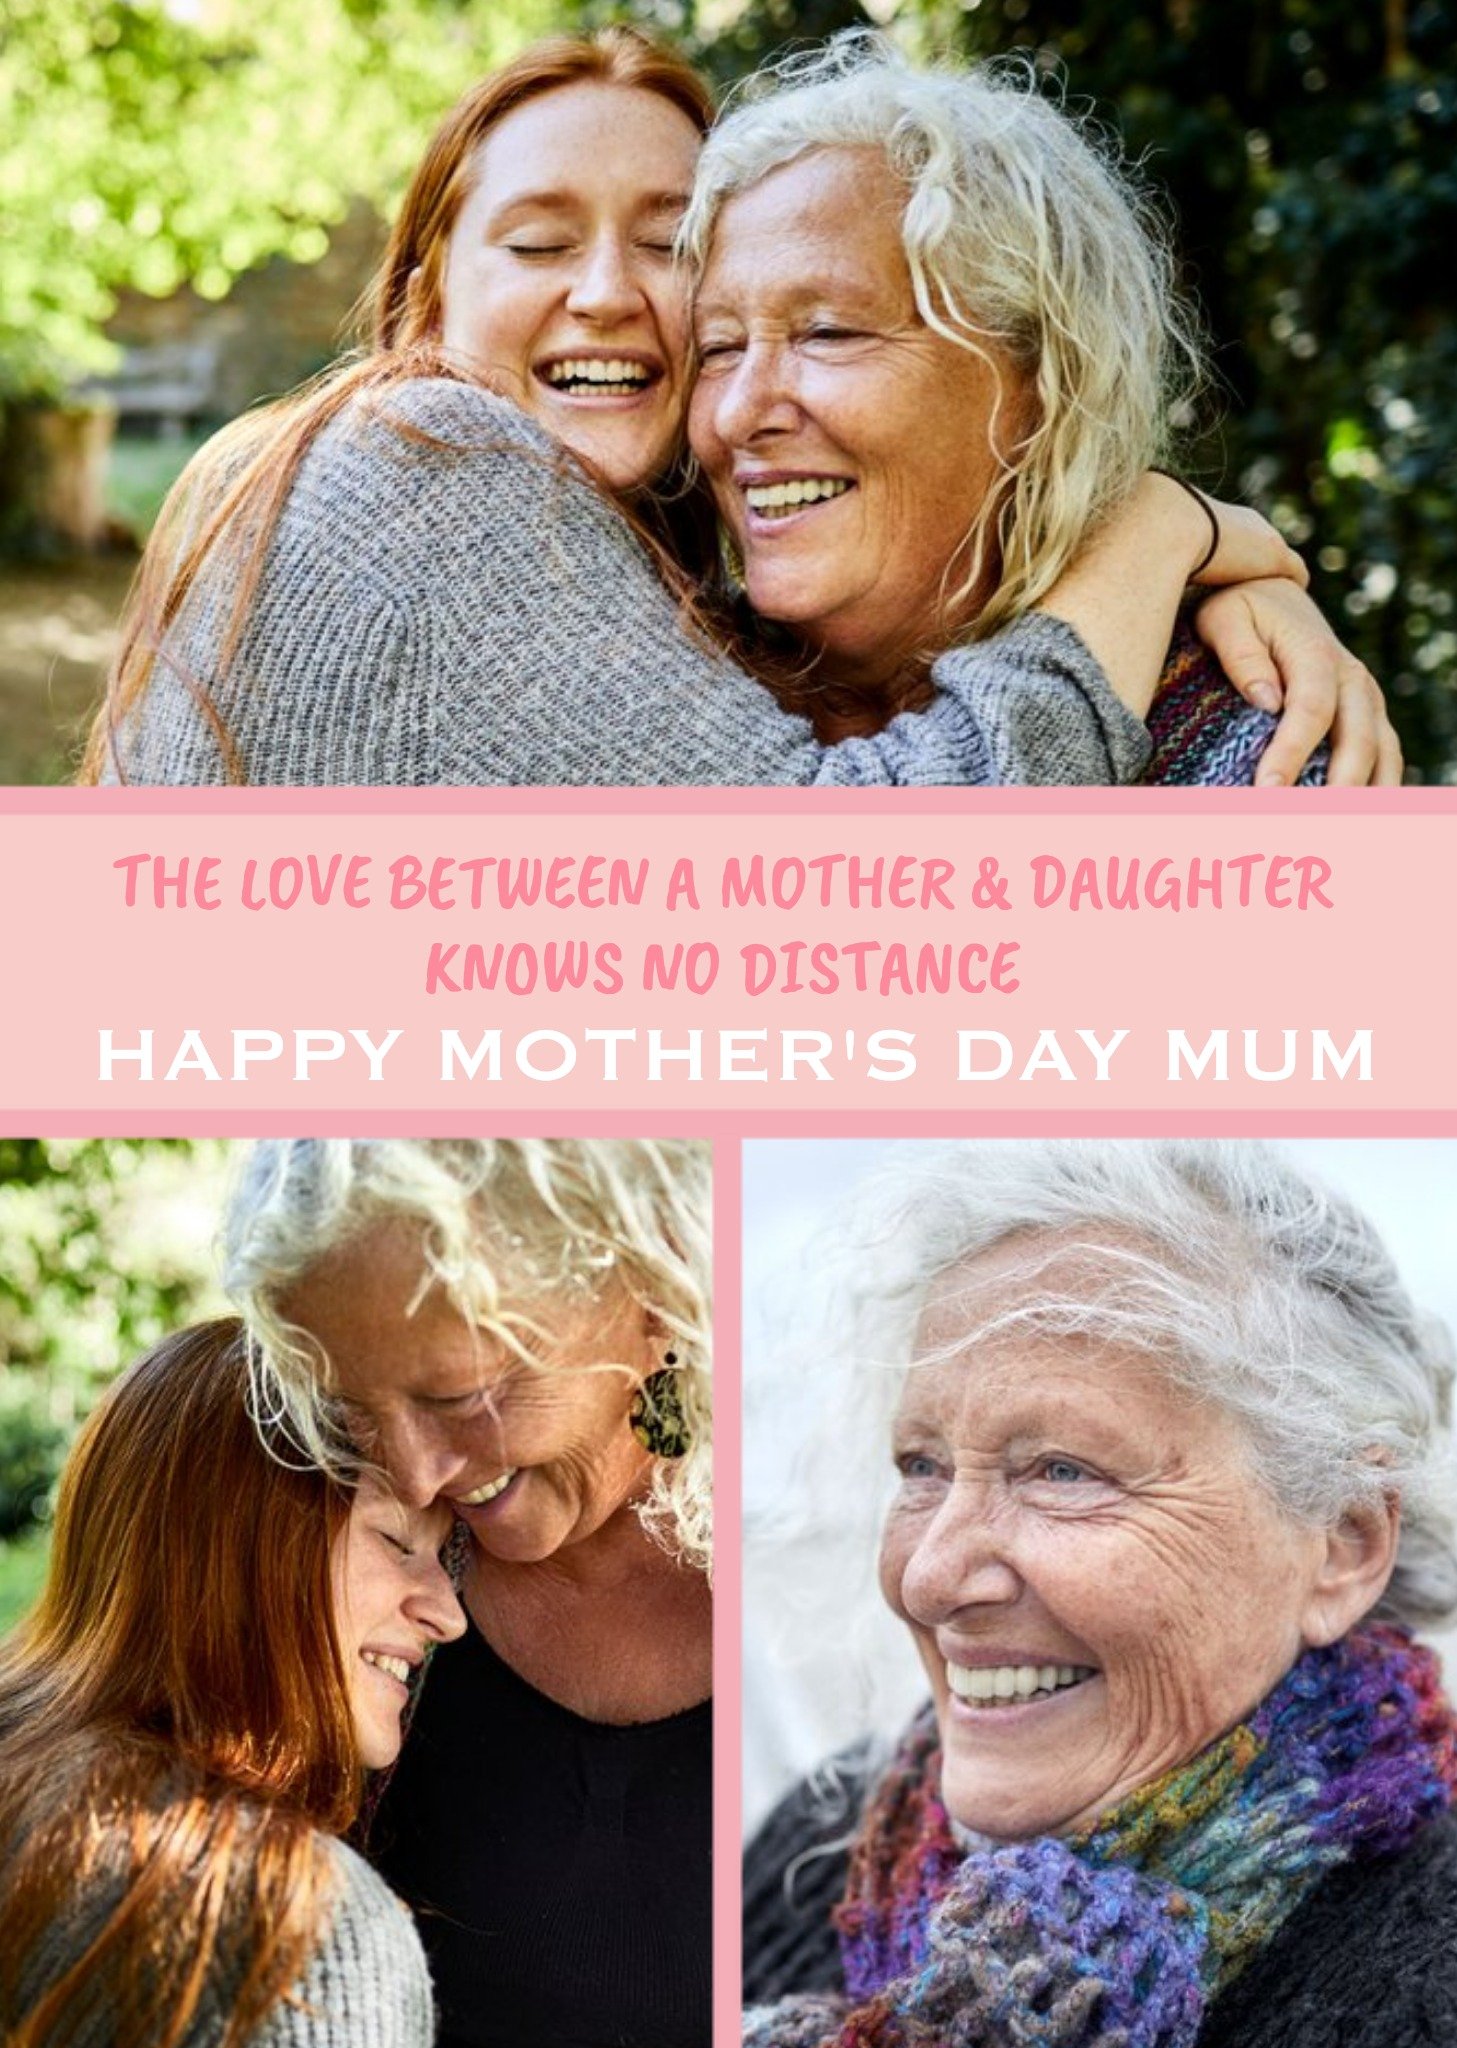 Moonpig The Love Between A Mother And Daughter Knows No Distance Photo Upload Mothers Day Card, Larg